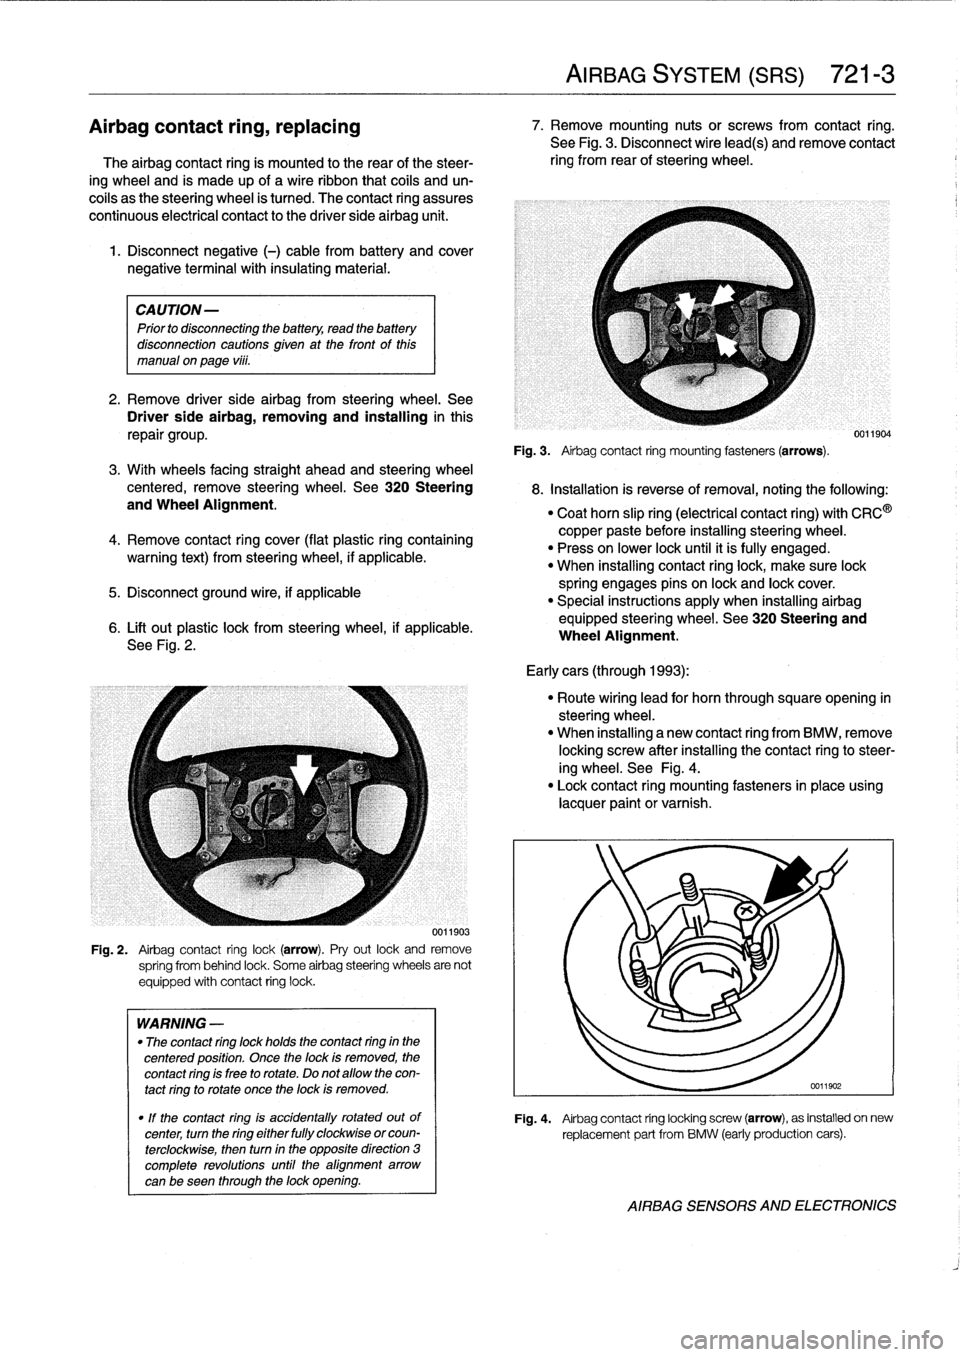 BMW 328i 1997 E36 Service Manual 
1
.
Disconnect
negative
(-)
cable
from
battery
and
cover

negative
terminal
with
insulating
material
.

CA
UTION-

Prior
to
disconnectiog
the
battery,
read
the
battery
disconnection
cautions
given
at